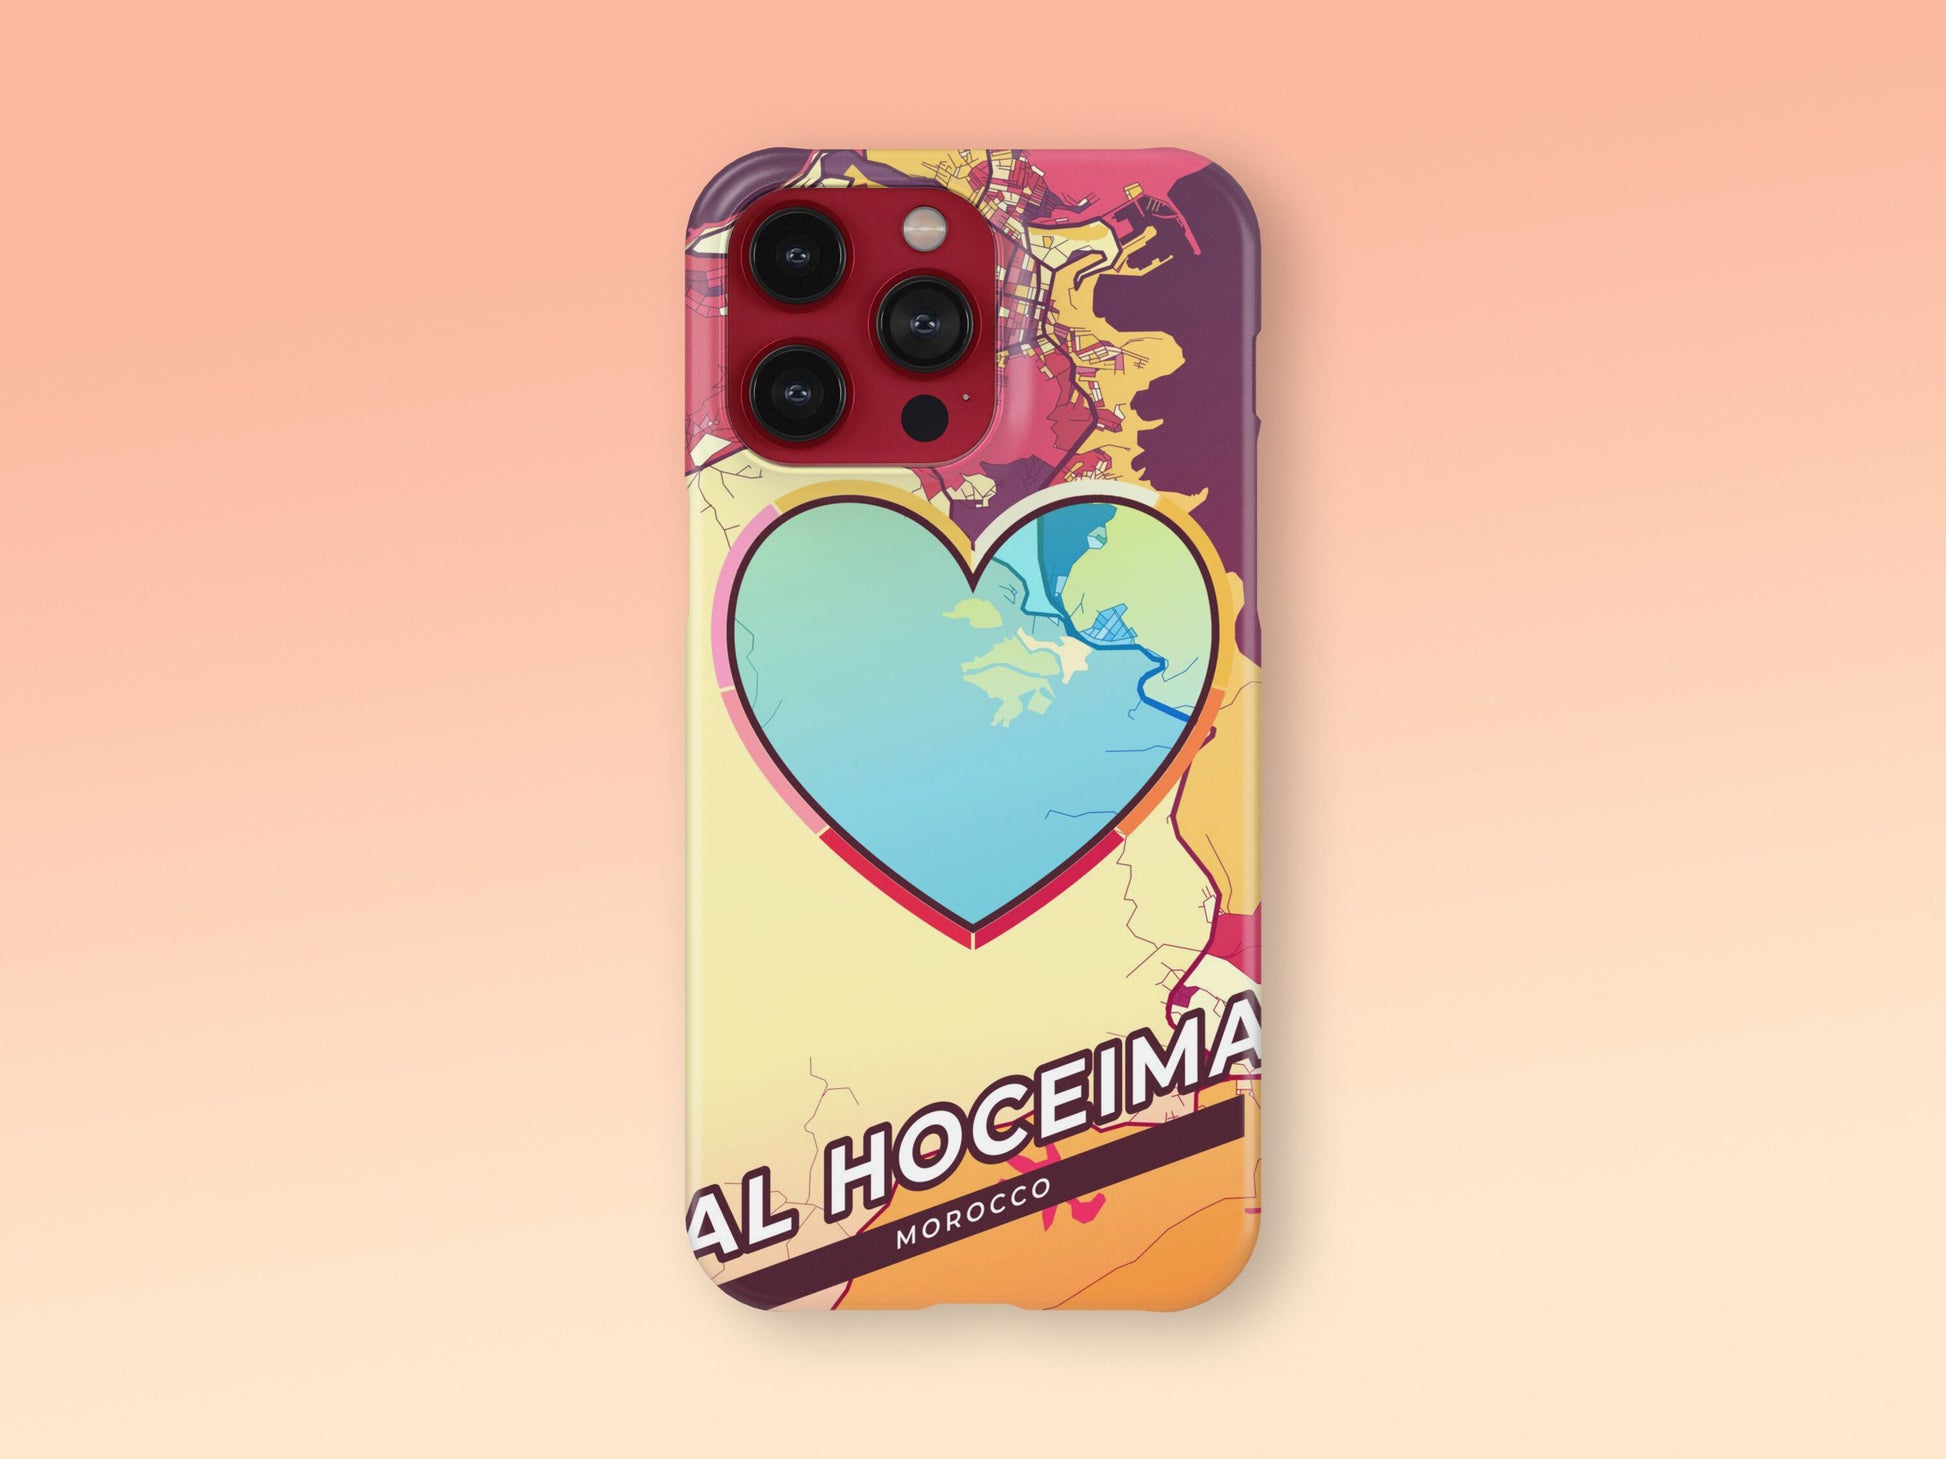 Al Hoceima Morocco slim phone case with colorful icon. Birthday, wedding or housewarming gift. Couple match cases. 2